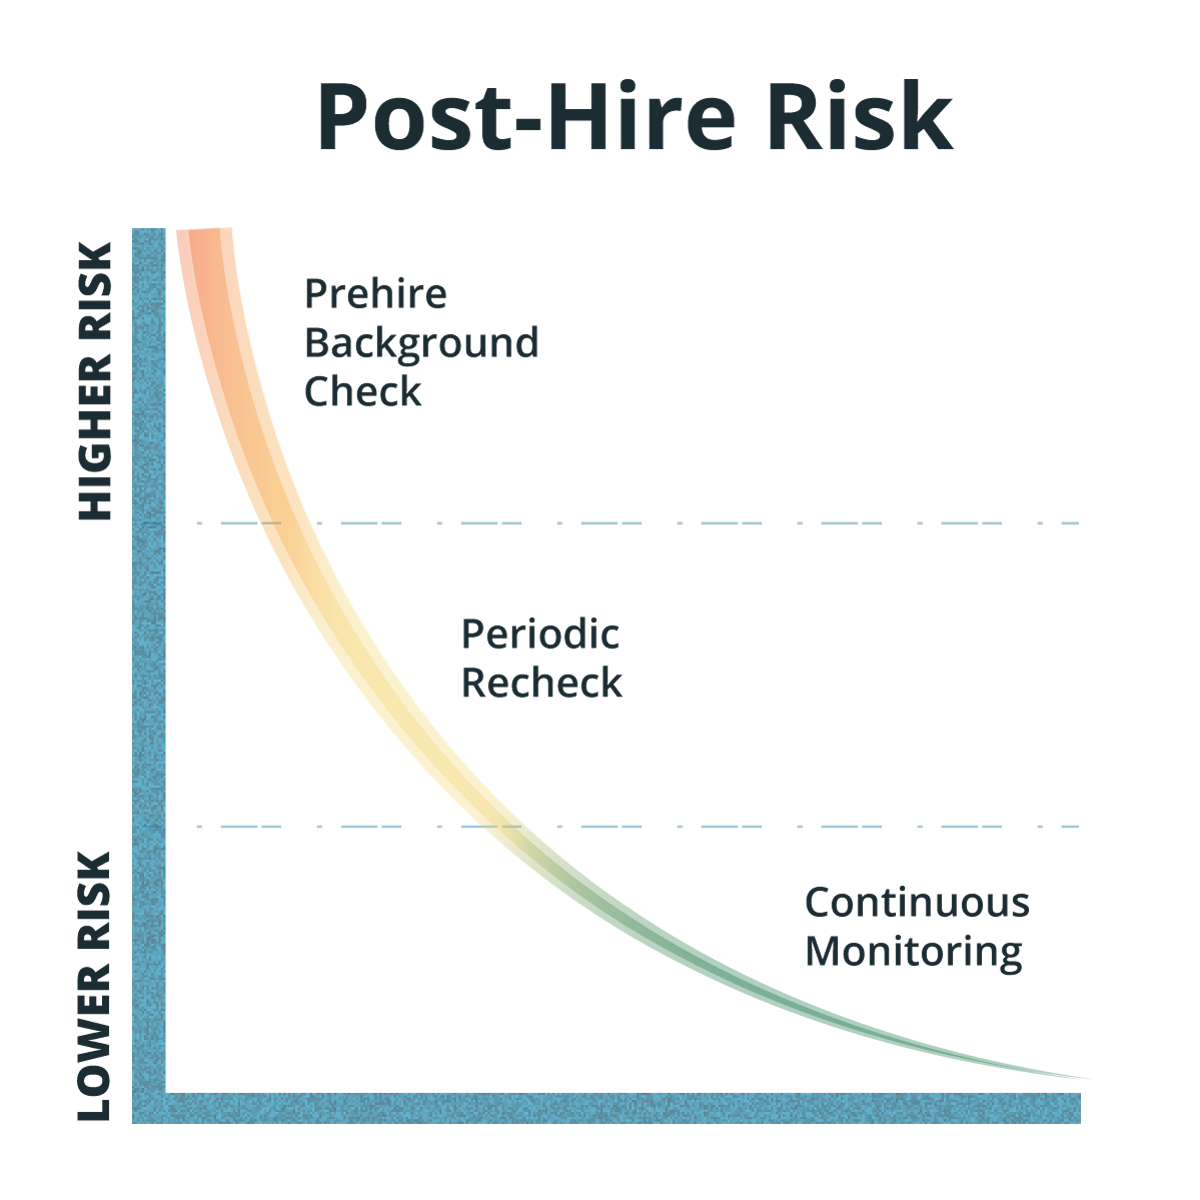 A post-hire risk graph that shows the risk level associated with monitoring status